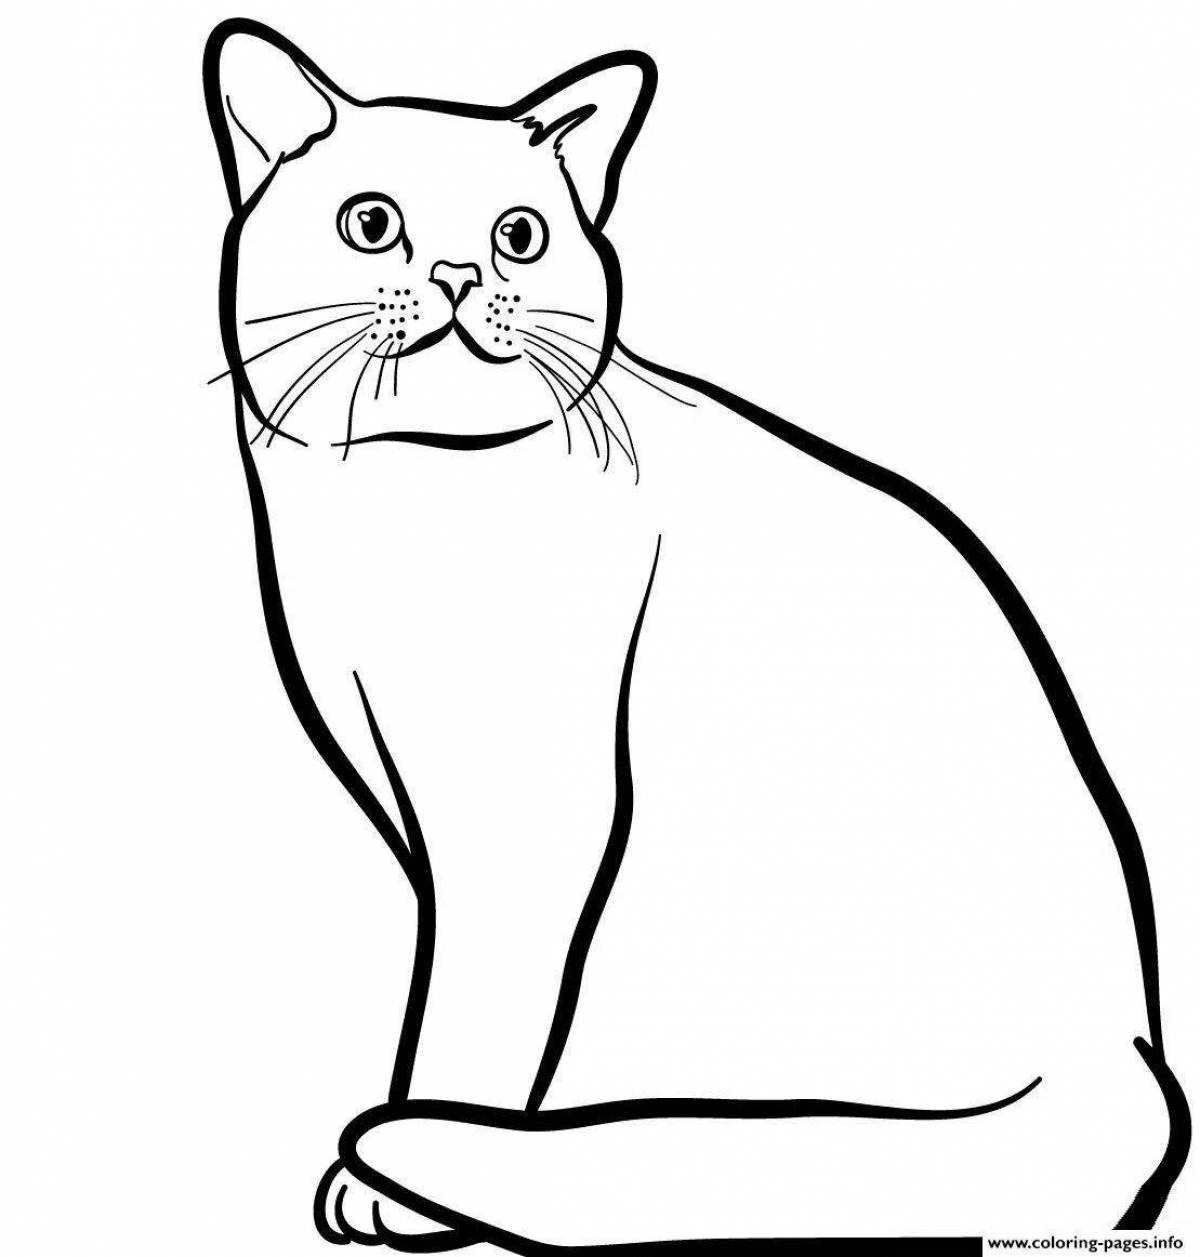 Coloring page friendly sitting cat